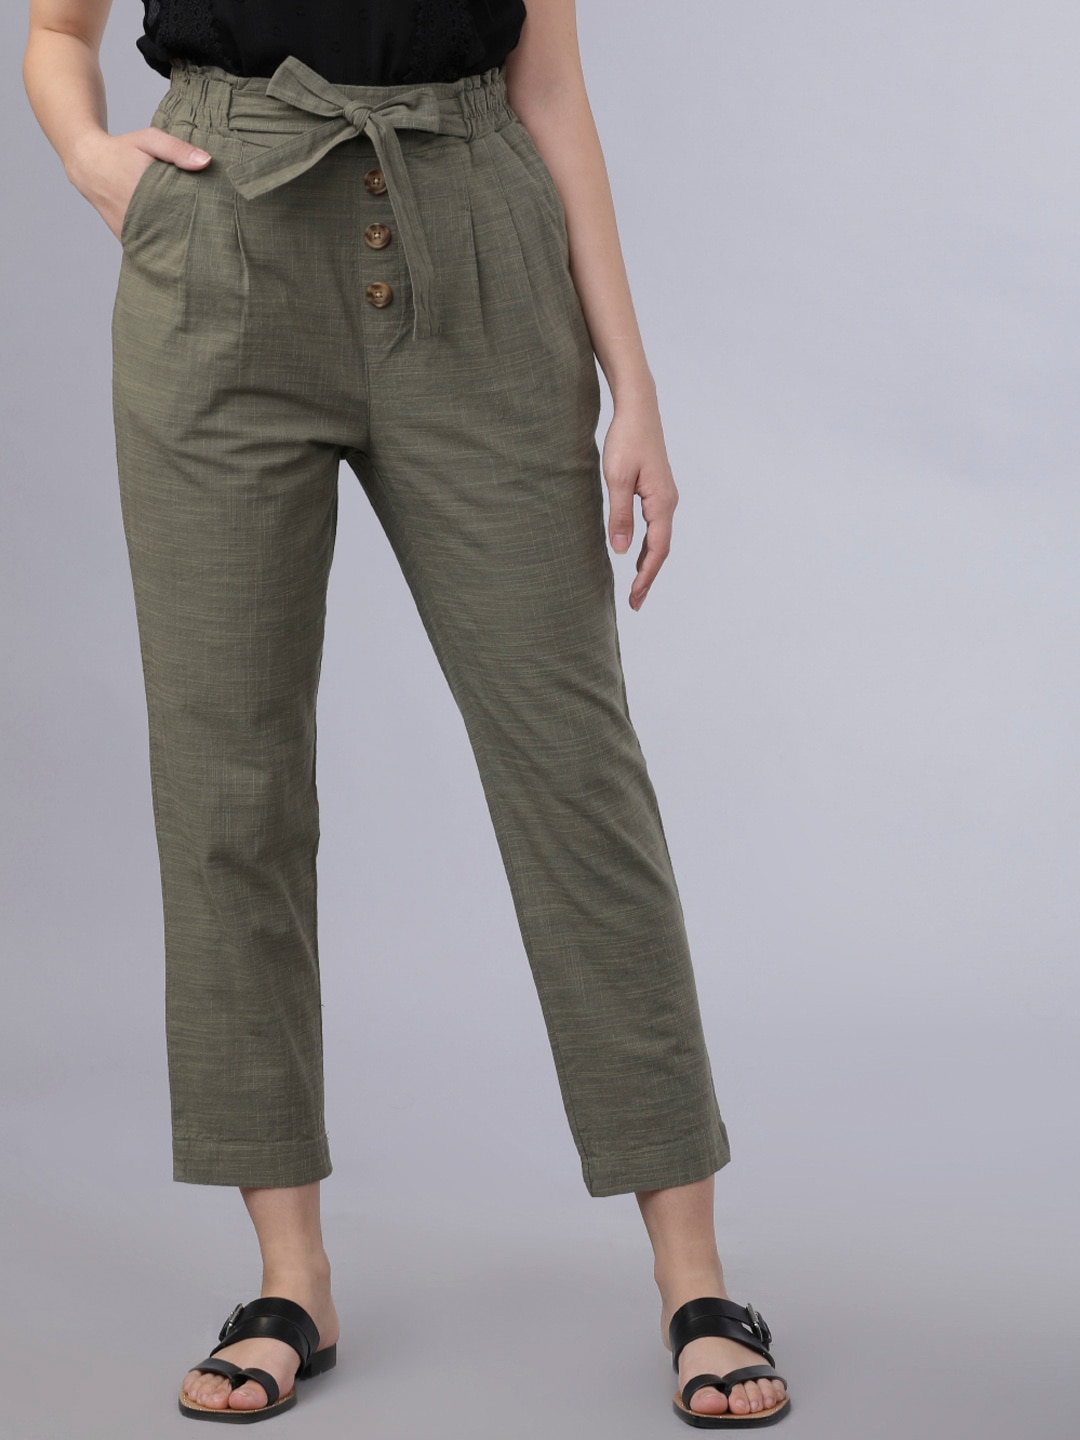 Tokyo Talkies Women Olive Green Regular Fit Self Design Ankle Length High-Waist Trousers Price in India